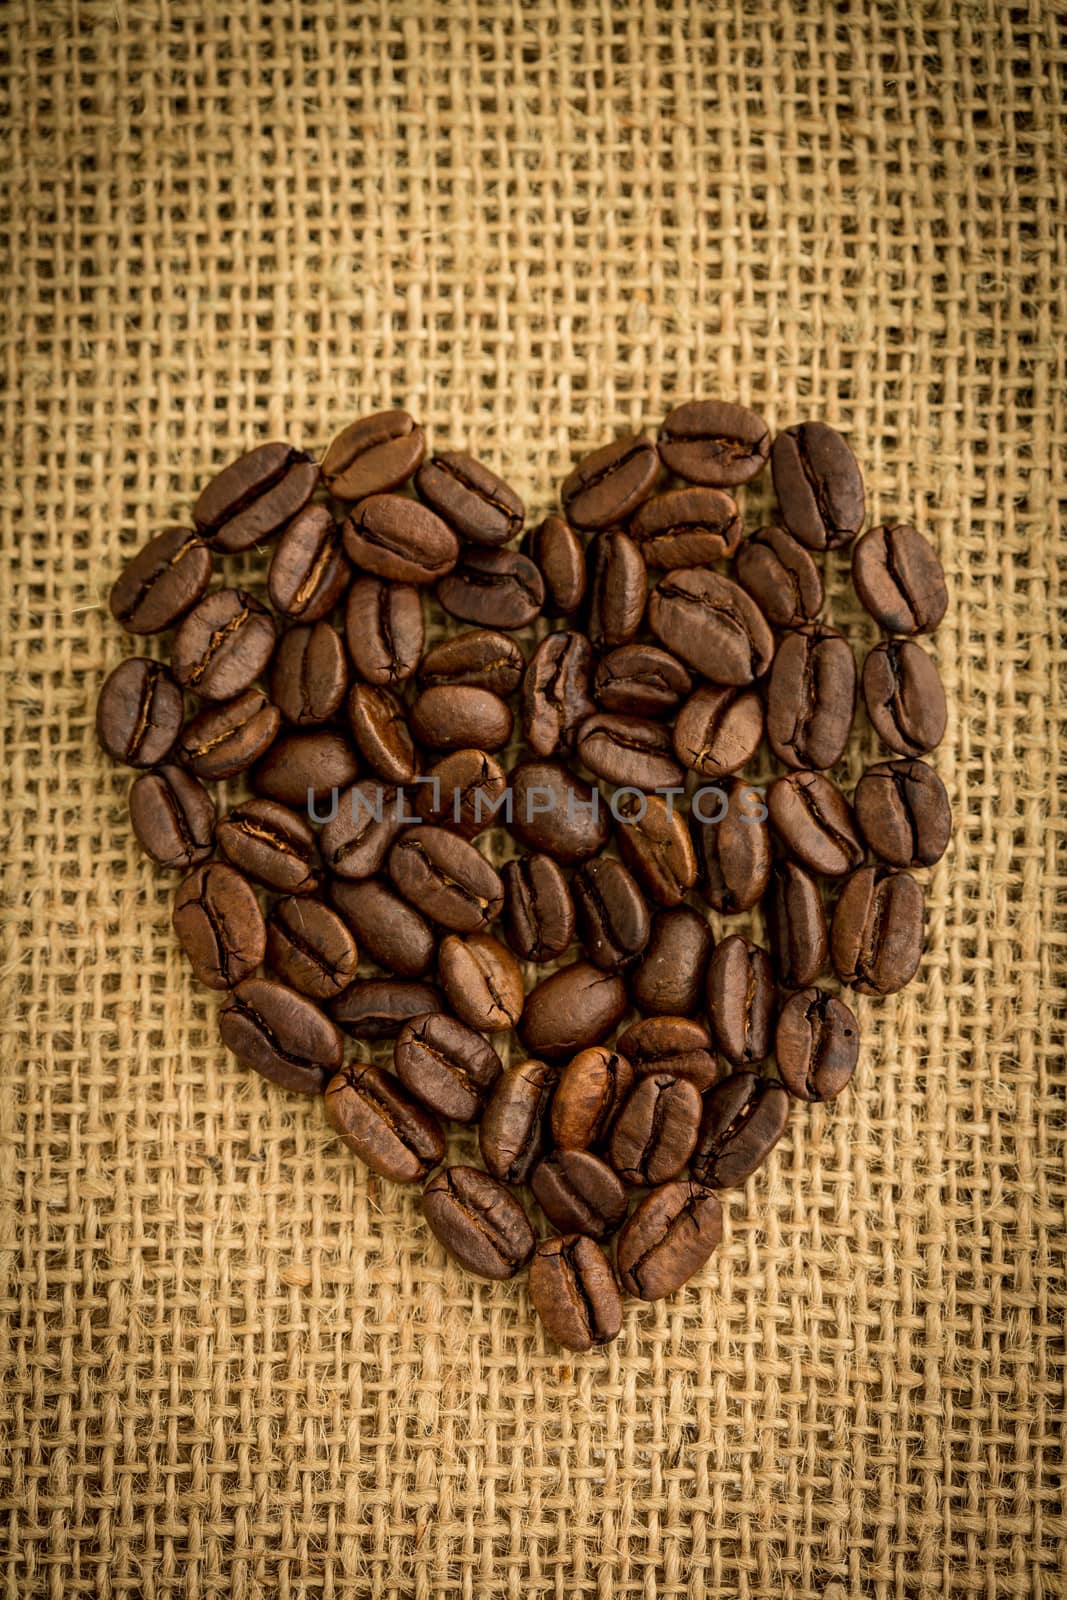 Heart made from roasted coffee beans on burlap sack